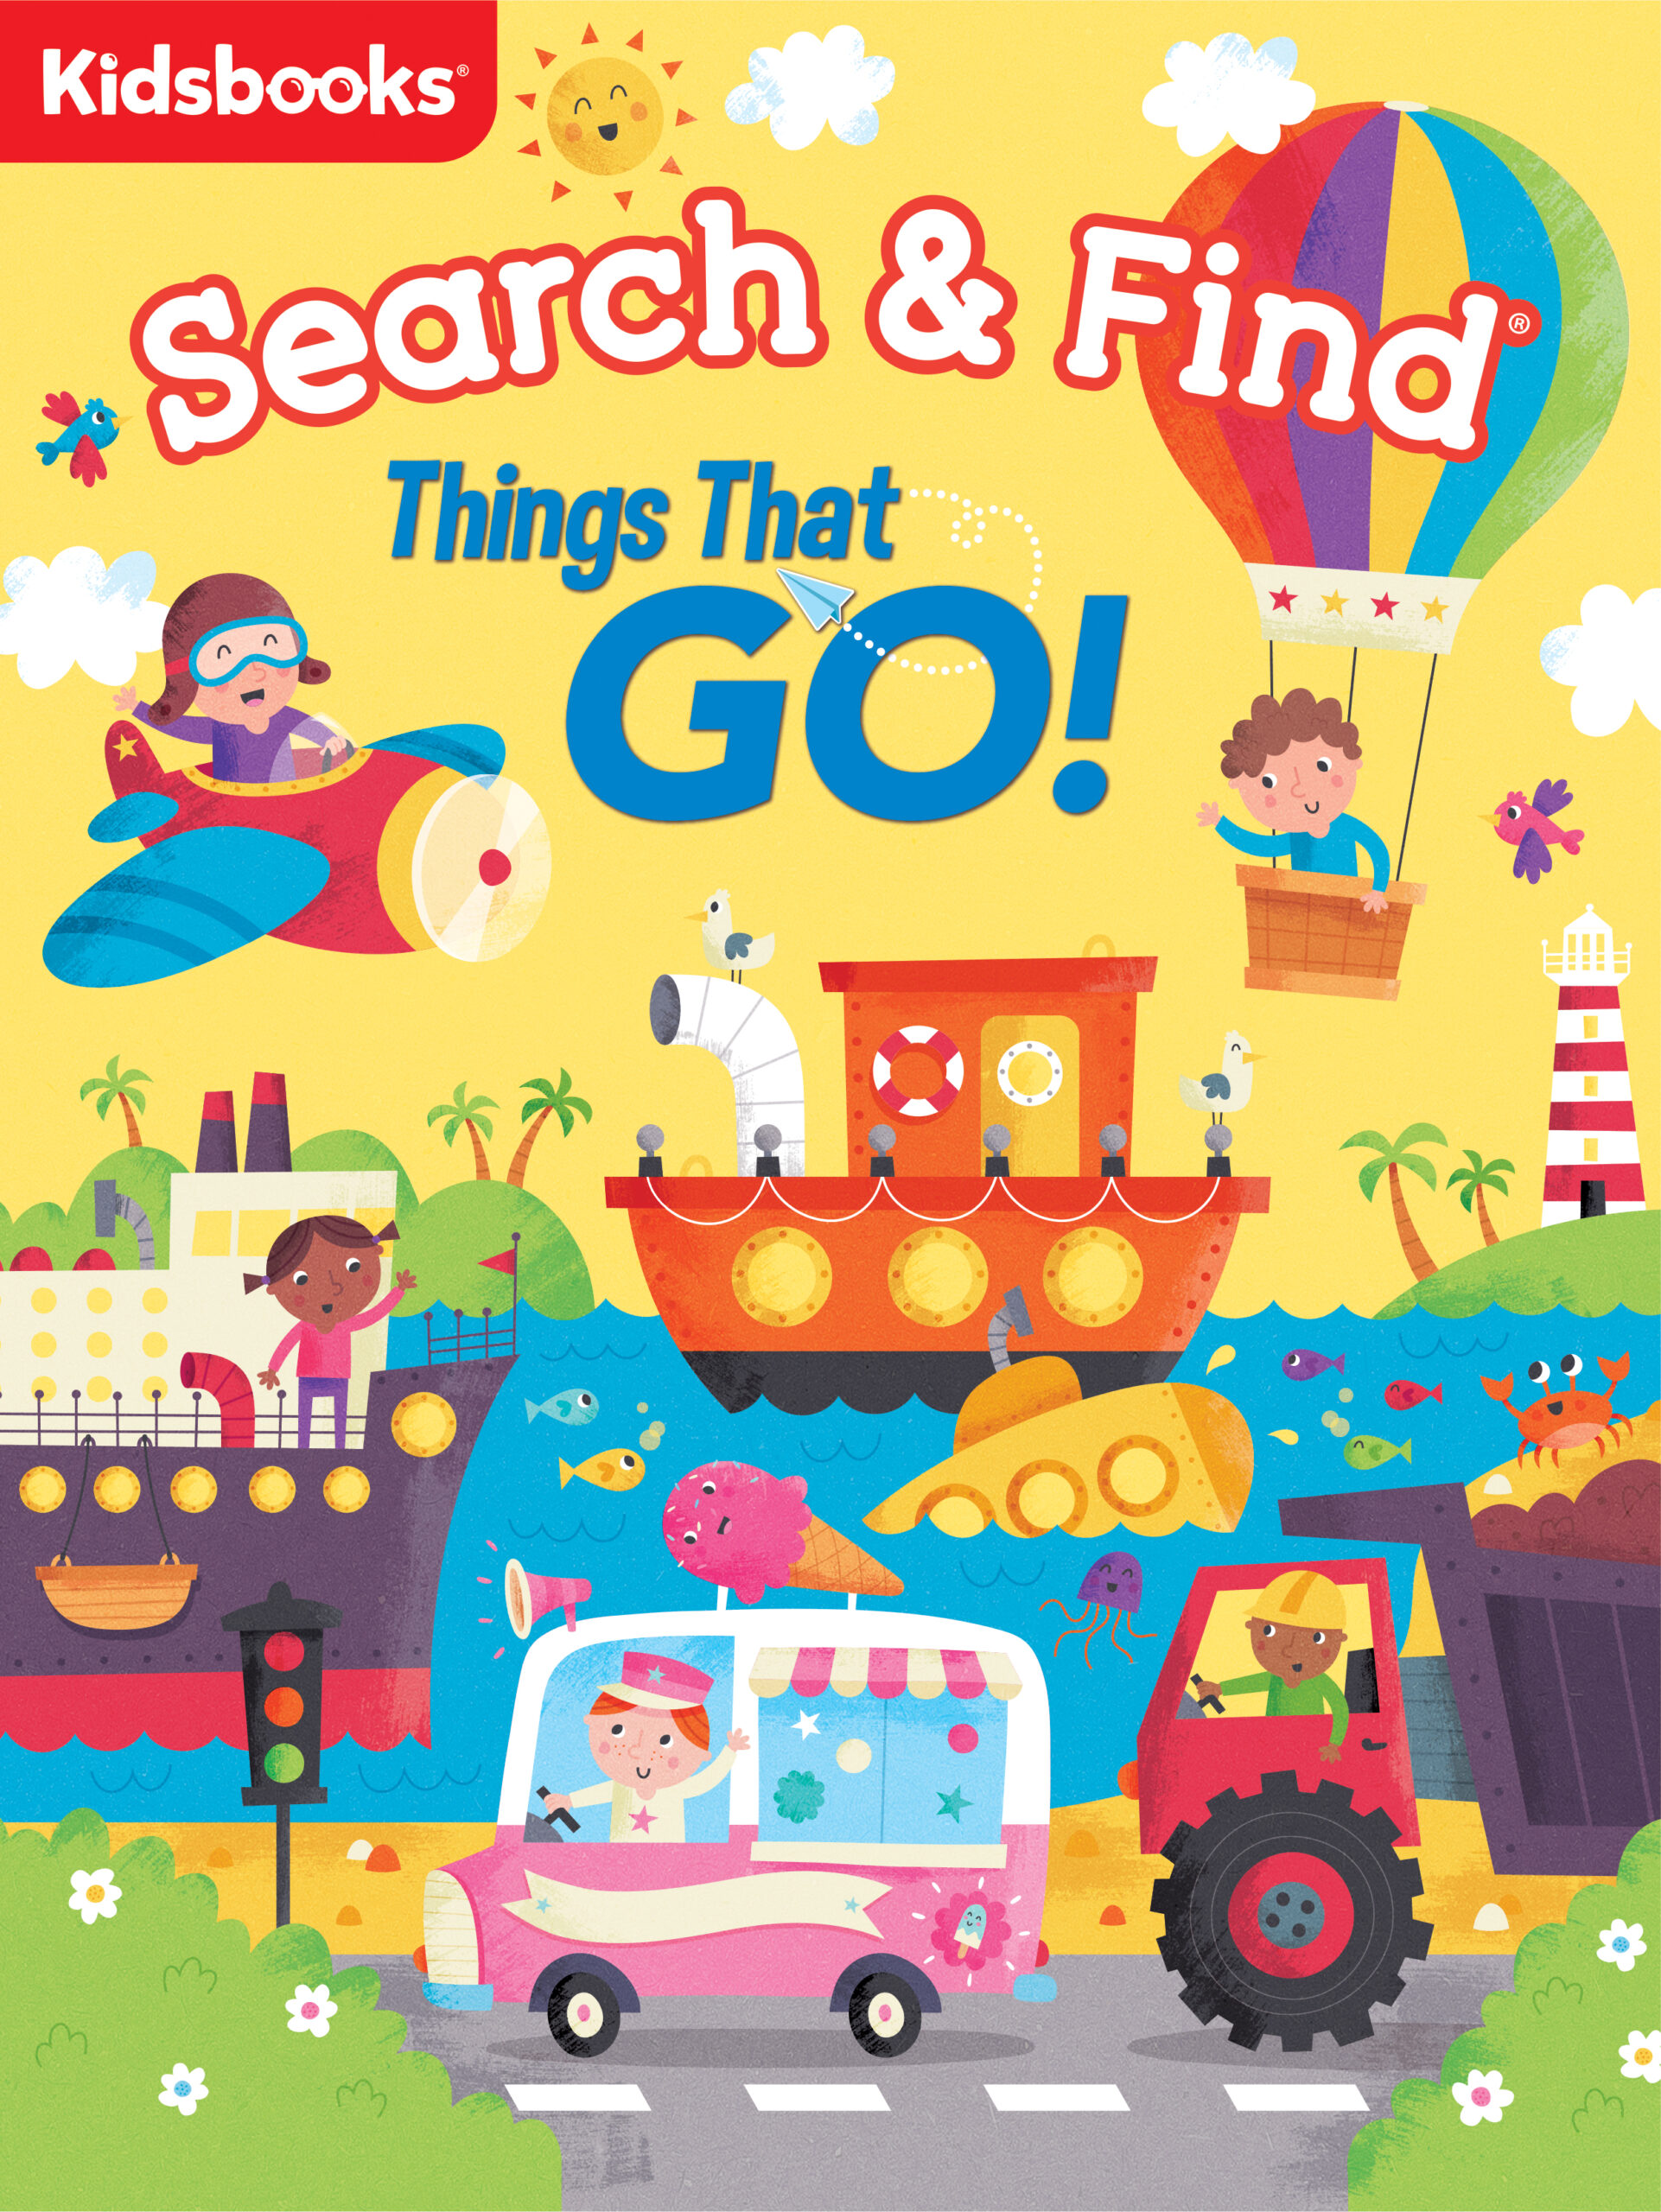 Search & Find: Things that Go